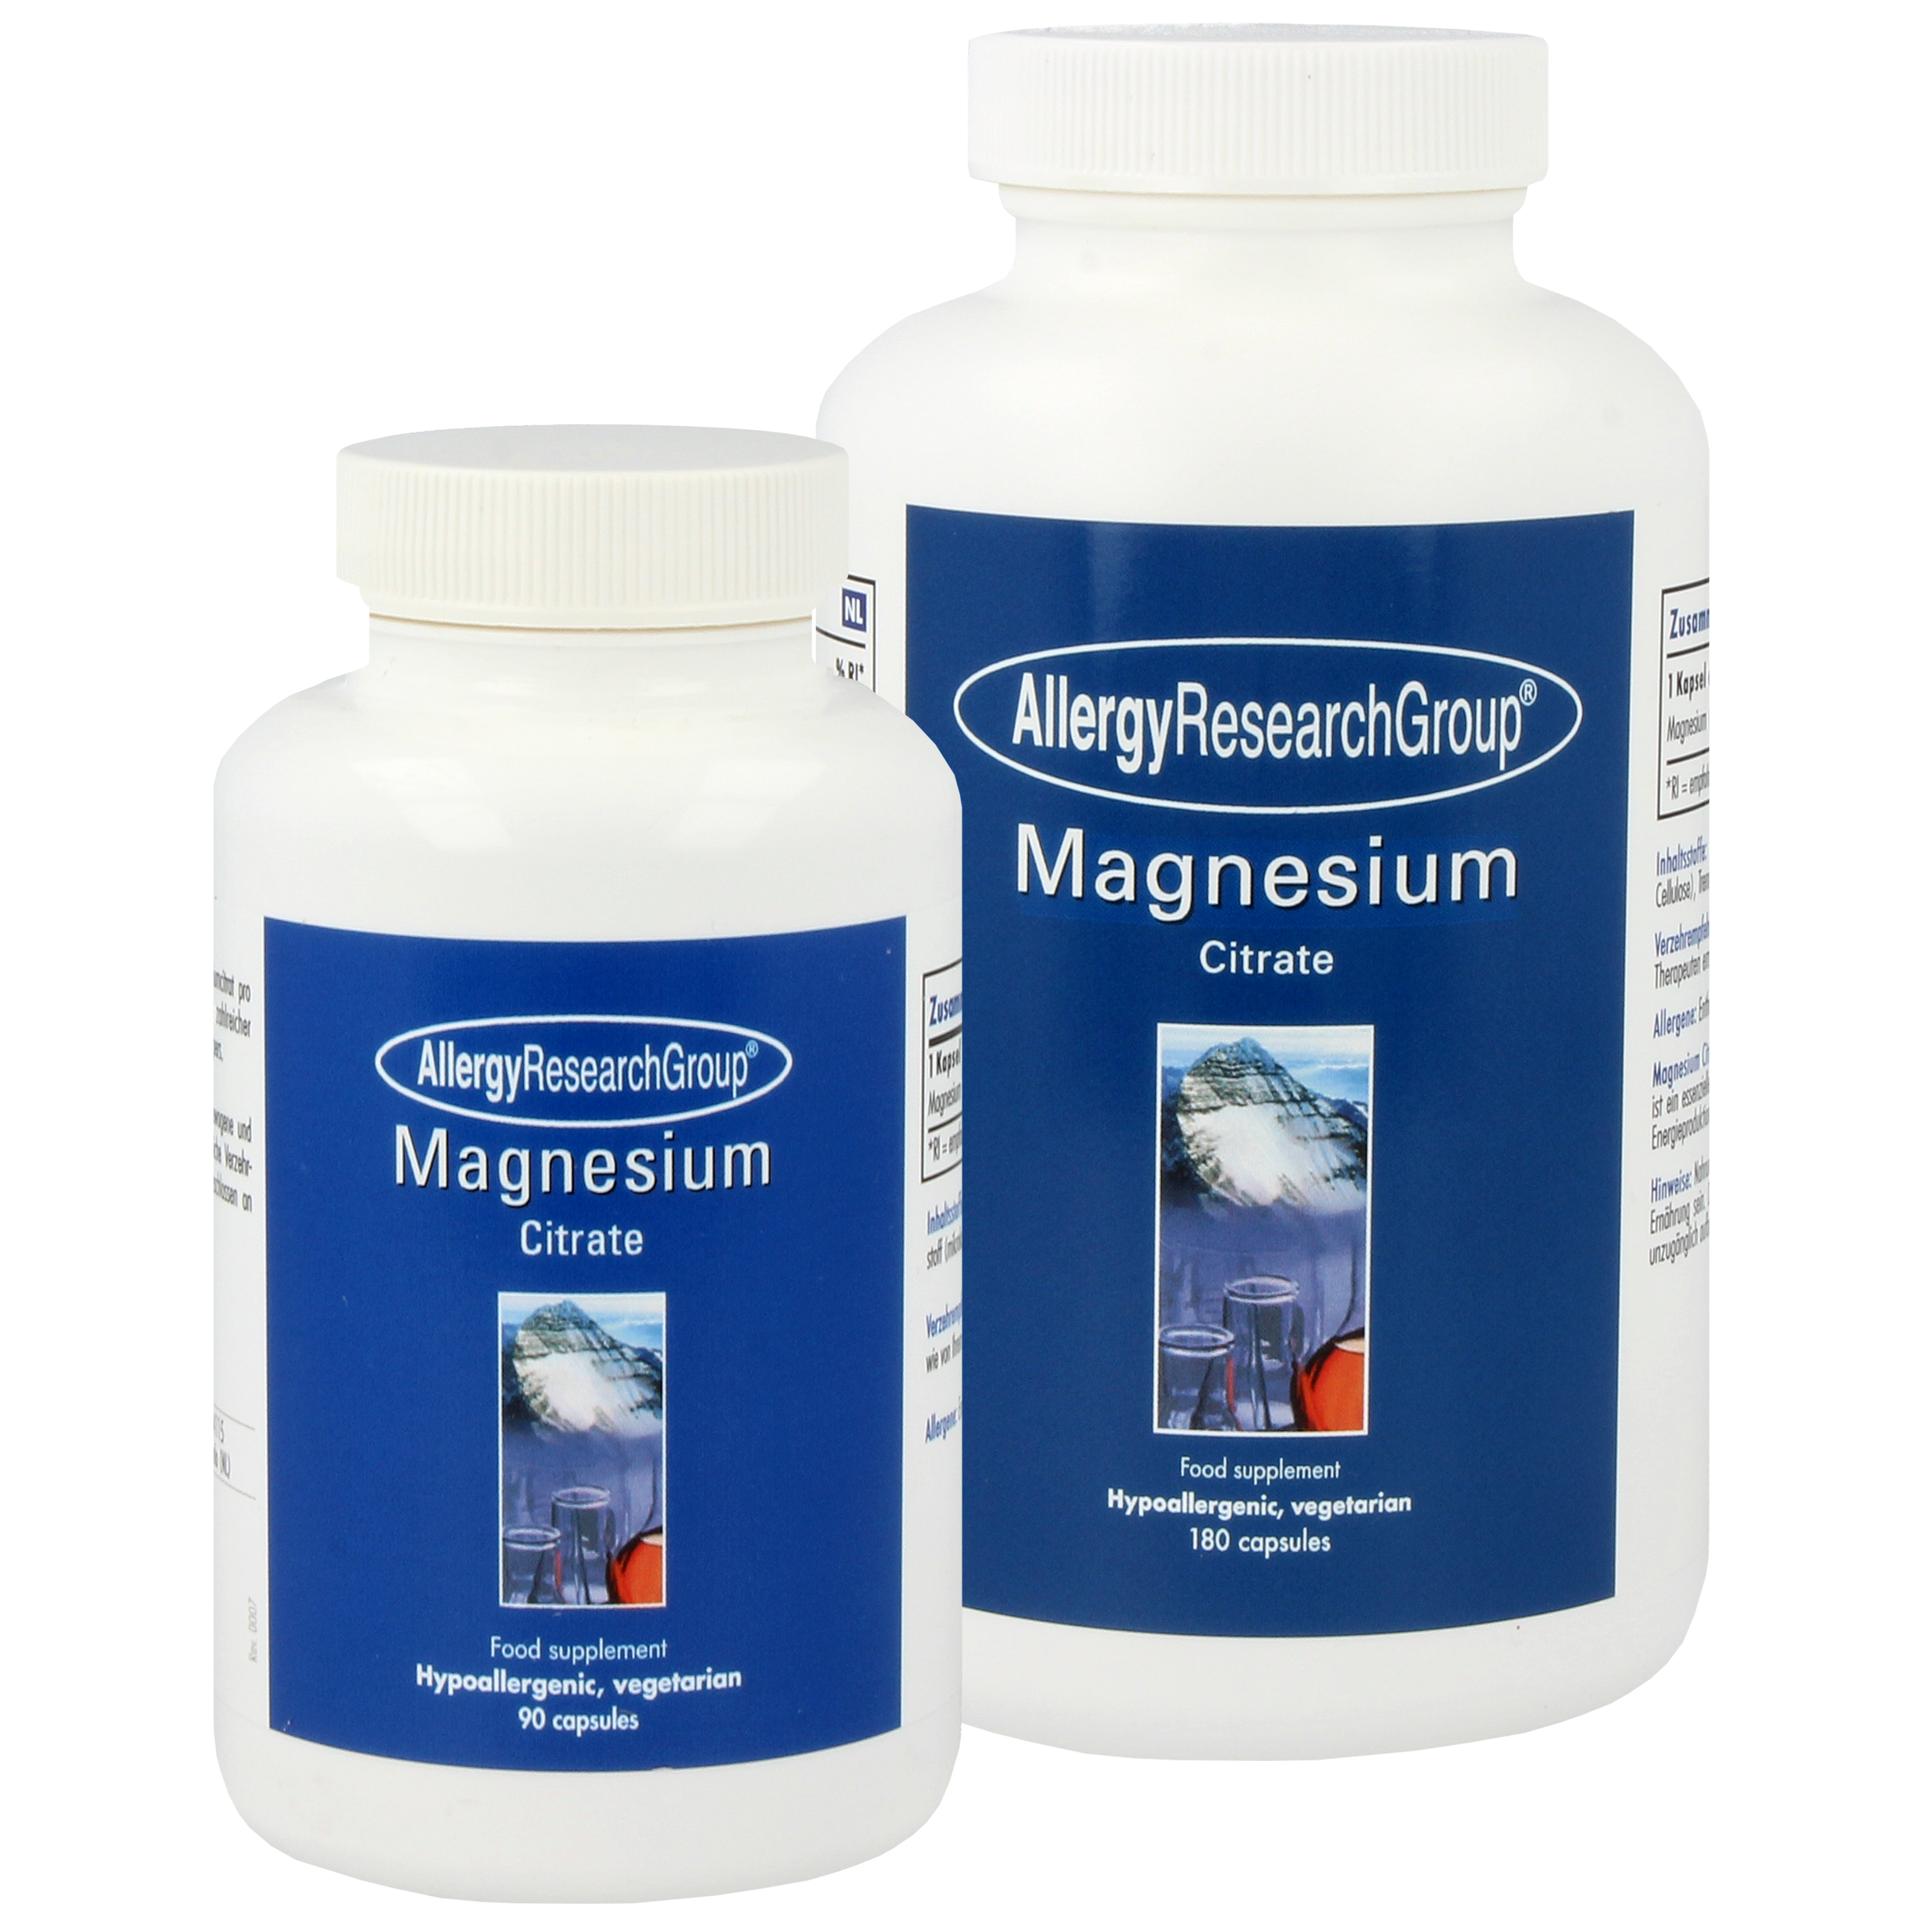 Magnesium Citrate 170 mg 